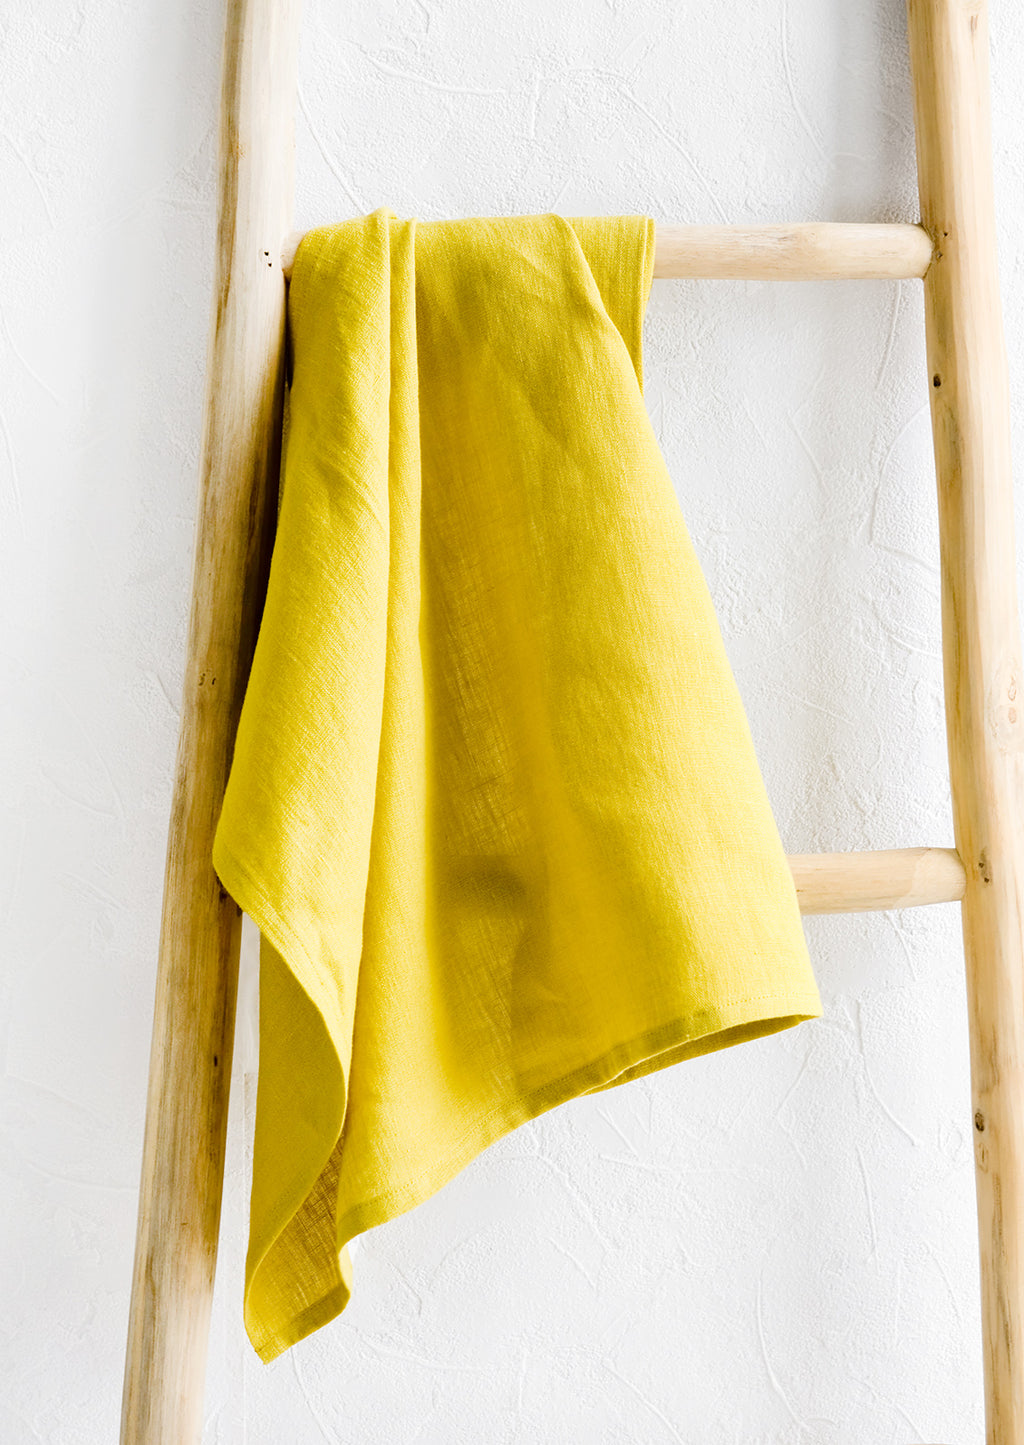 Chartreuse: A chatreuse linen tea towel draped on a wooden ladder.